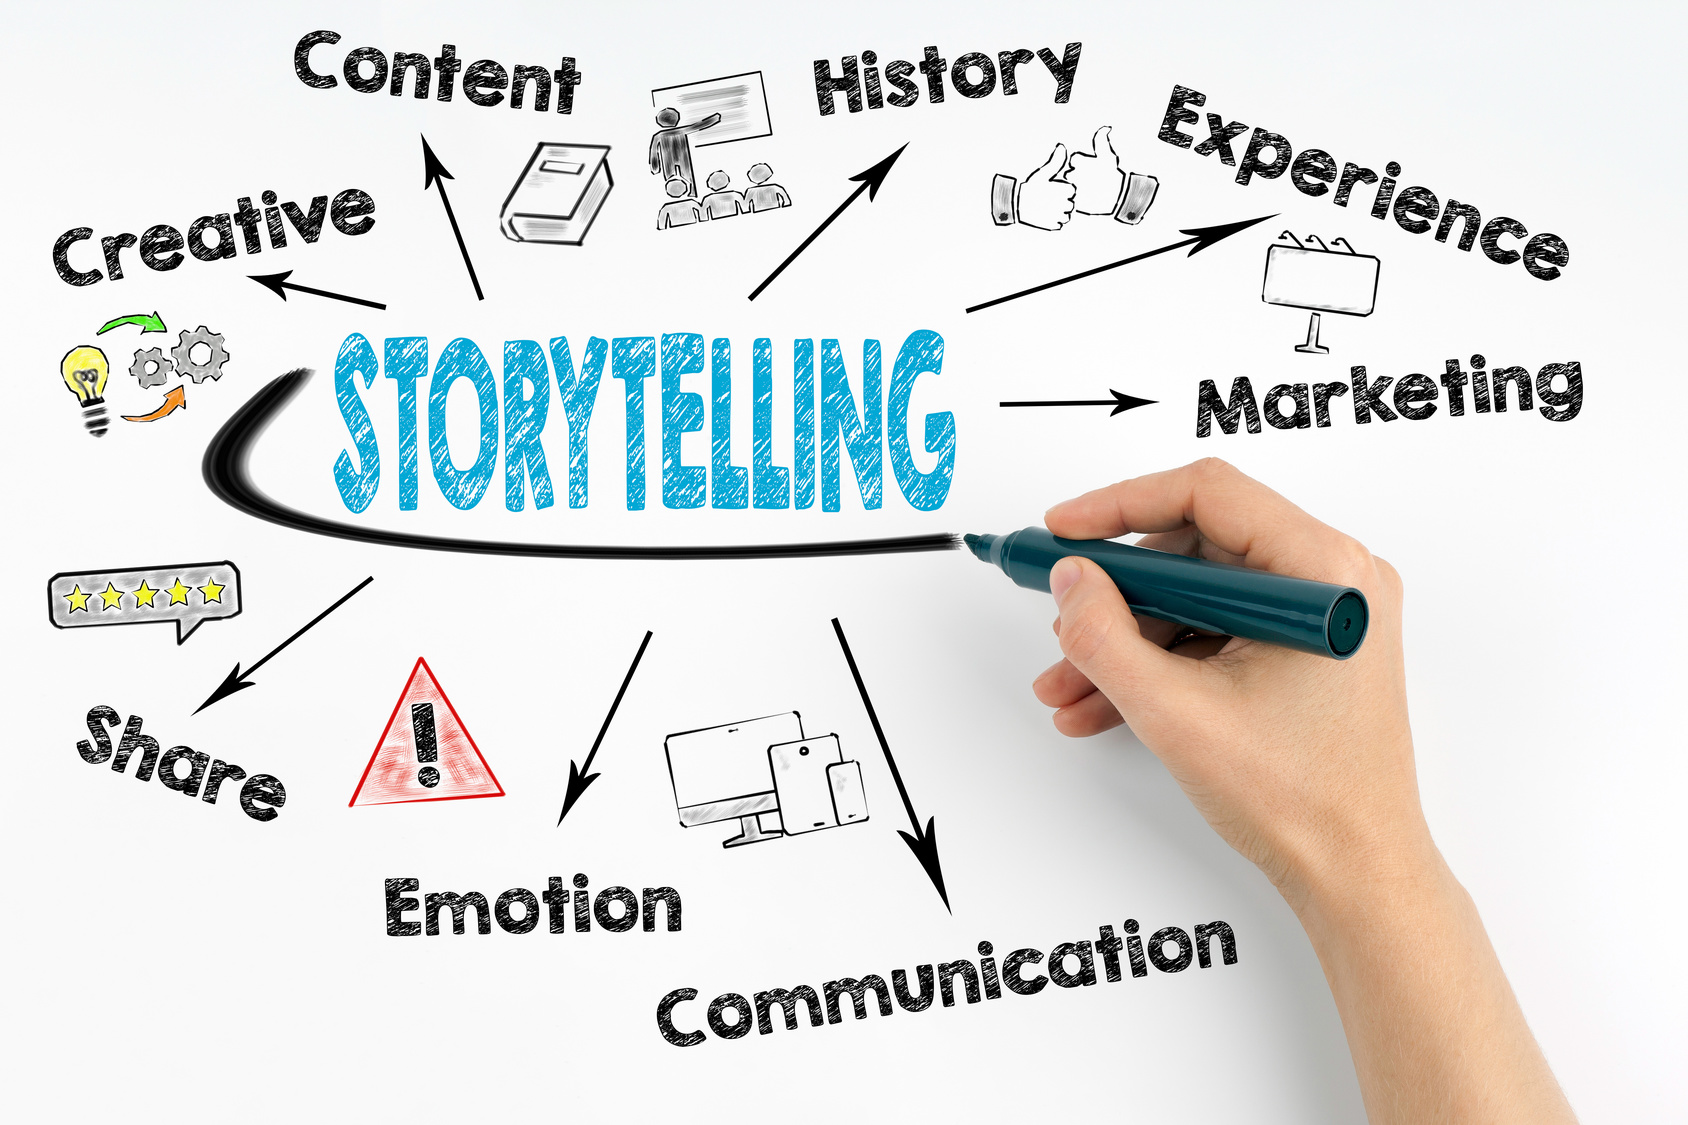 Brand Storytelling 101: 6 Must Have Content Elements